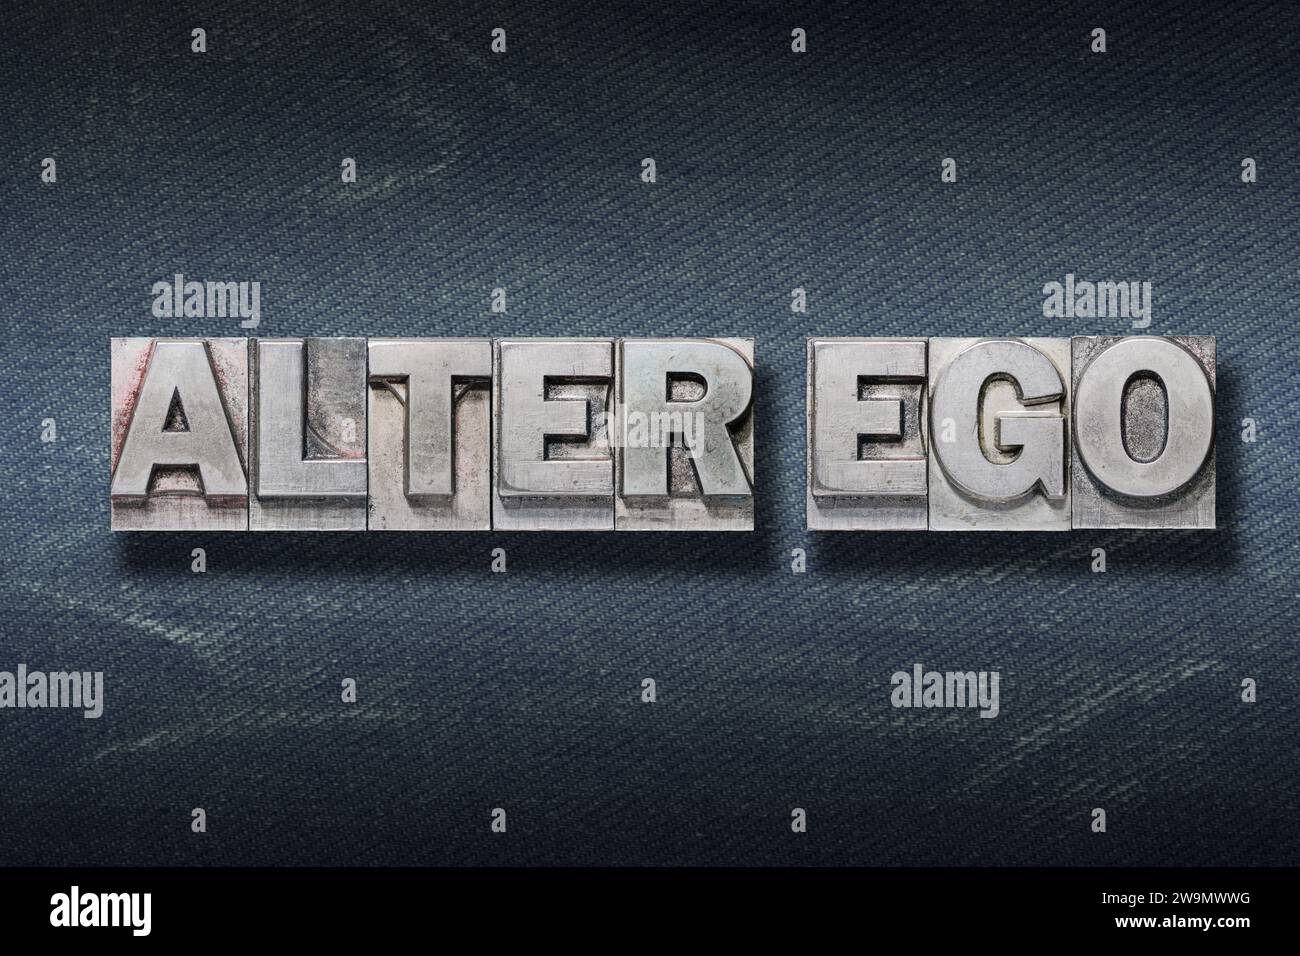 alter ego (second I) phrase made from metallic letterpress on dark jeans background Stock Photo